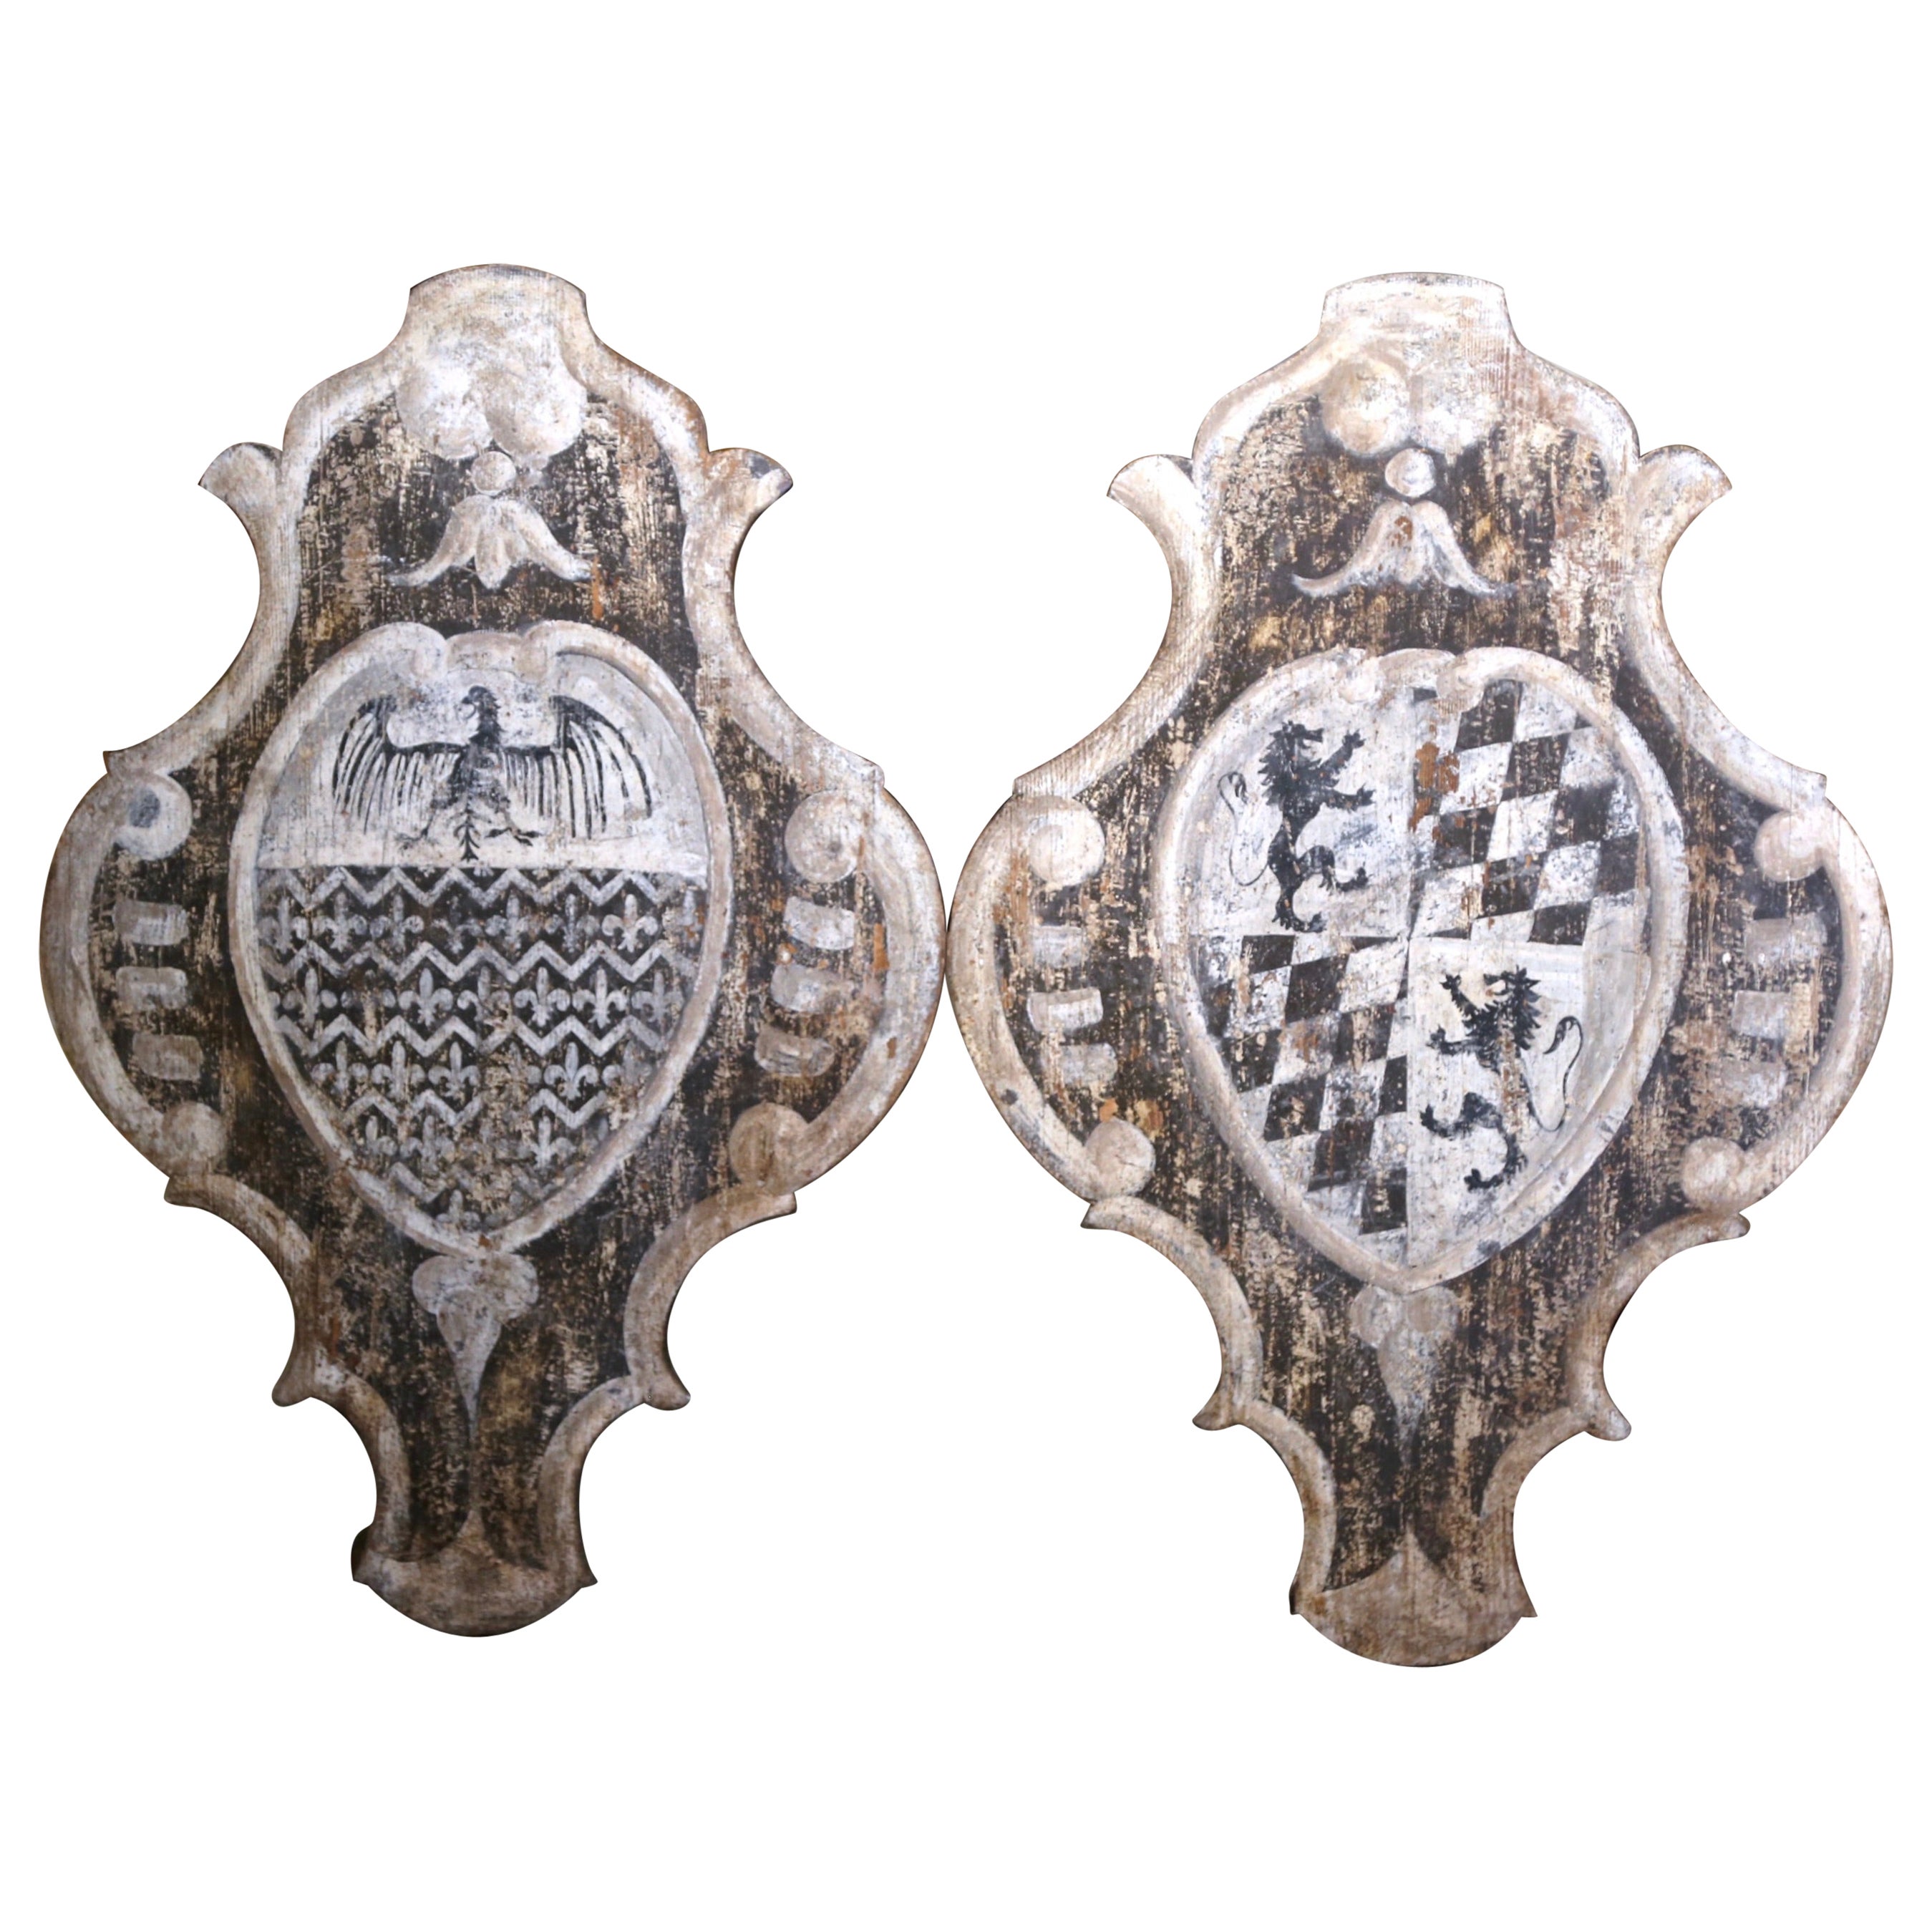 Pair of 19th Century Italian Painted Wall Hanging Shields with Family Crests